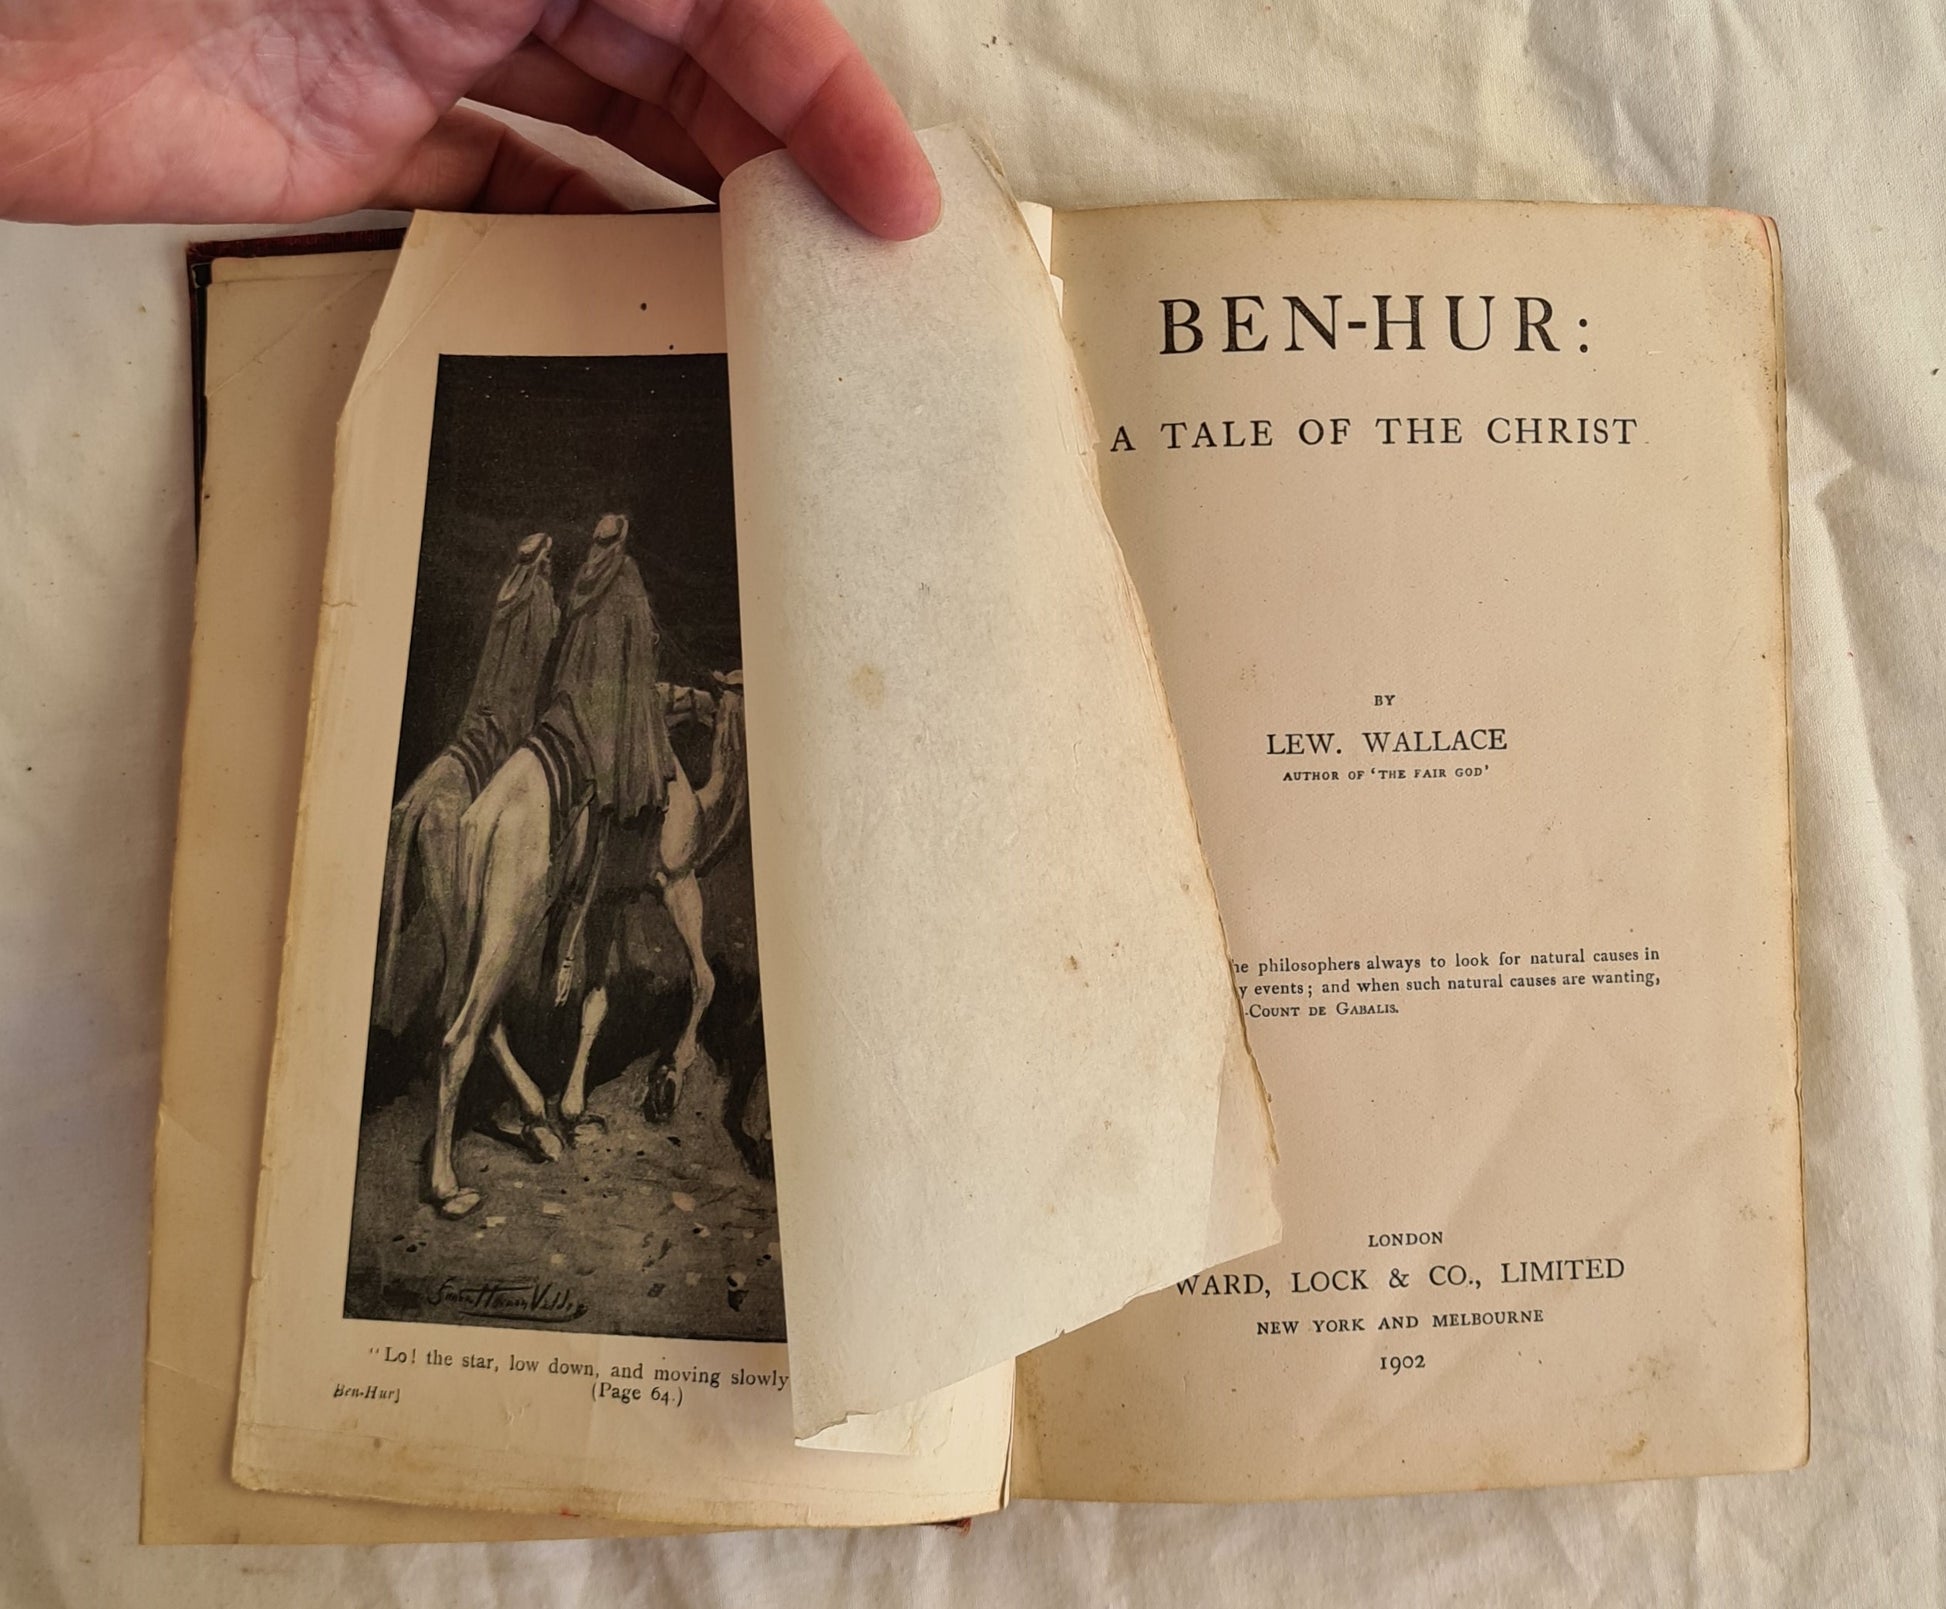 Ben-Hur  A Tale of the Christ  by Lew. Wallace